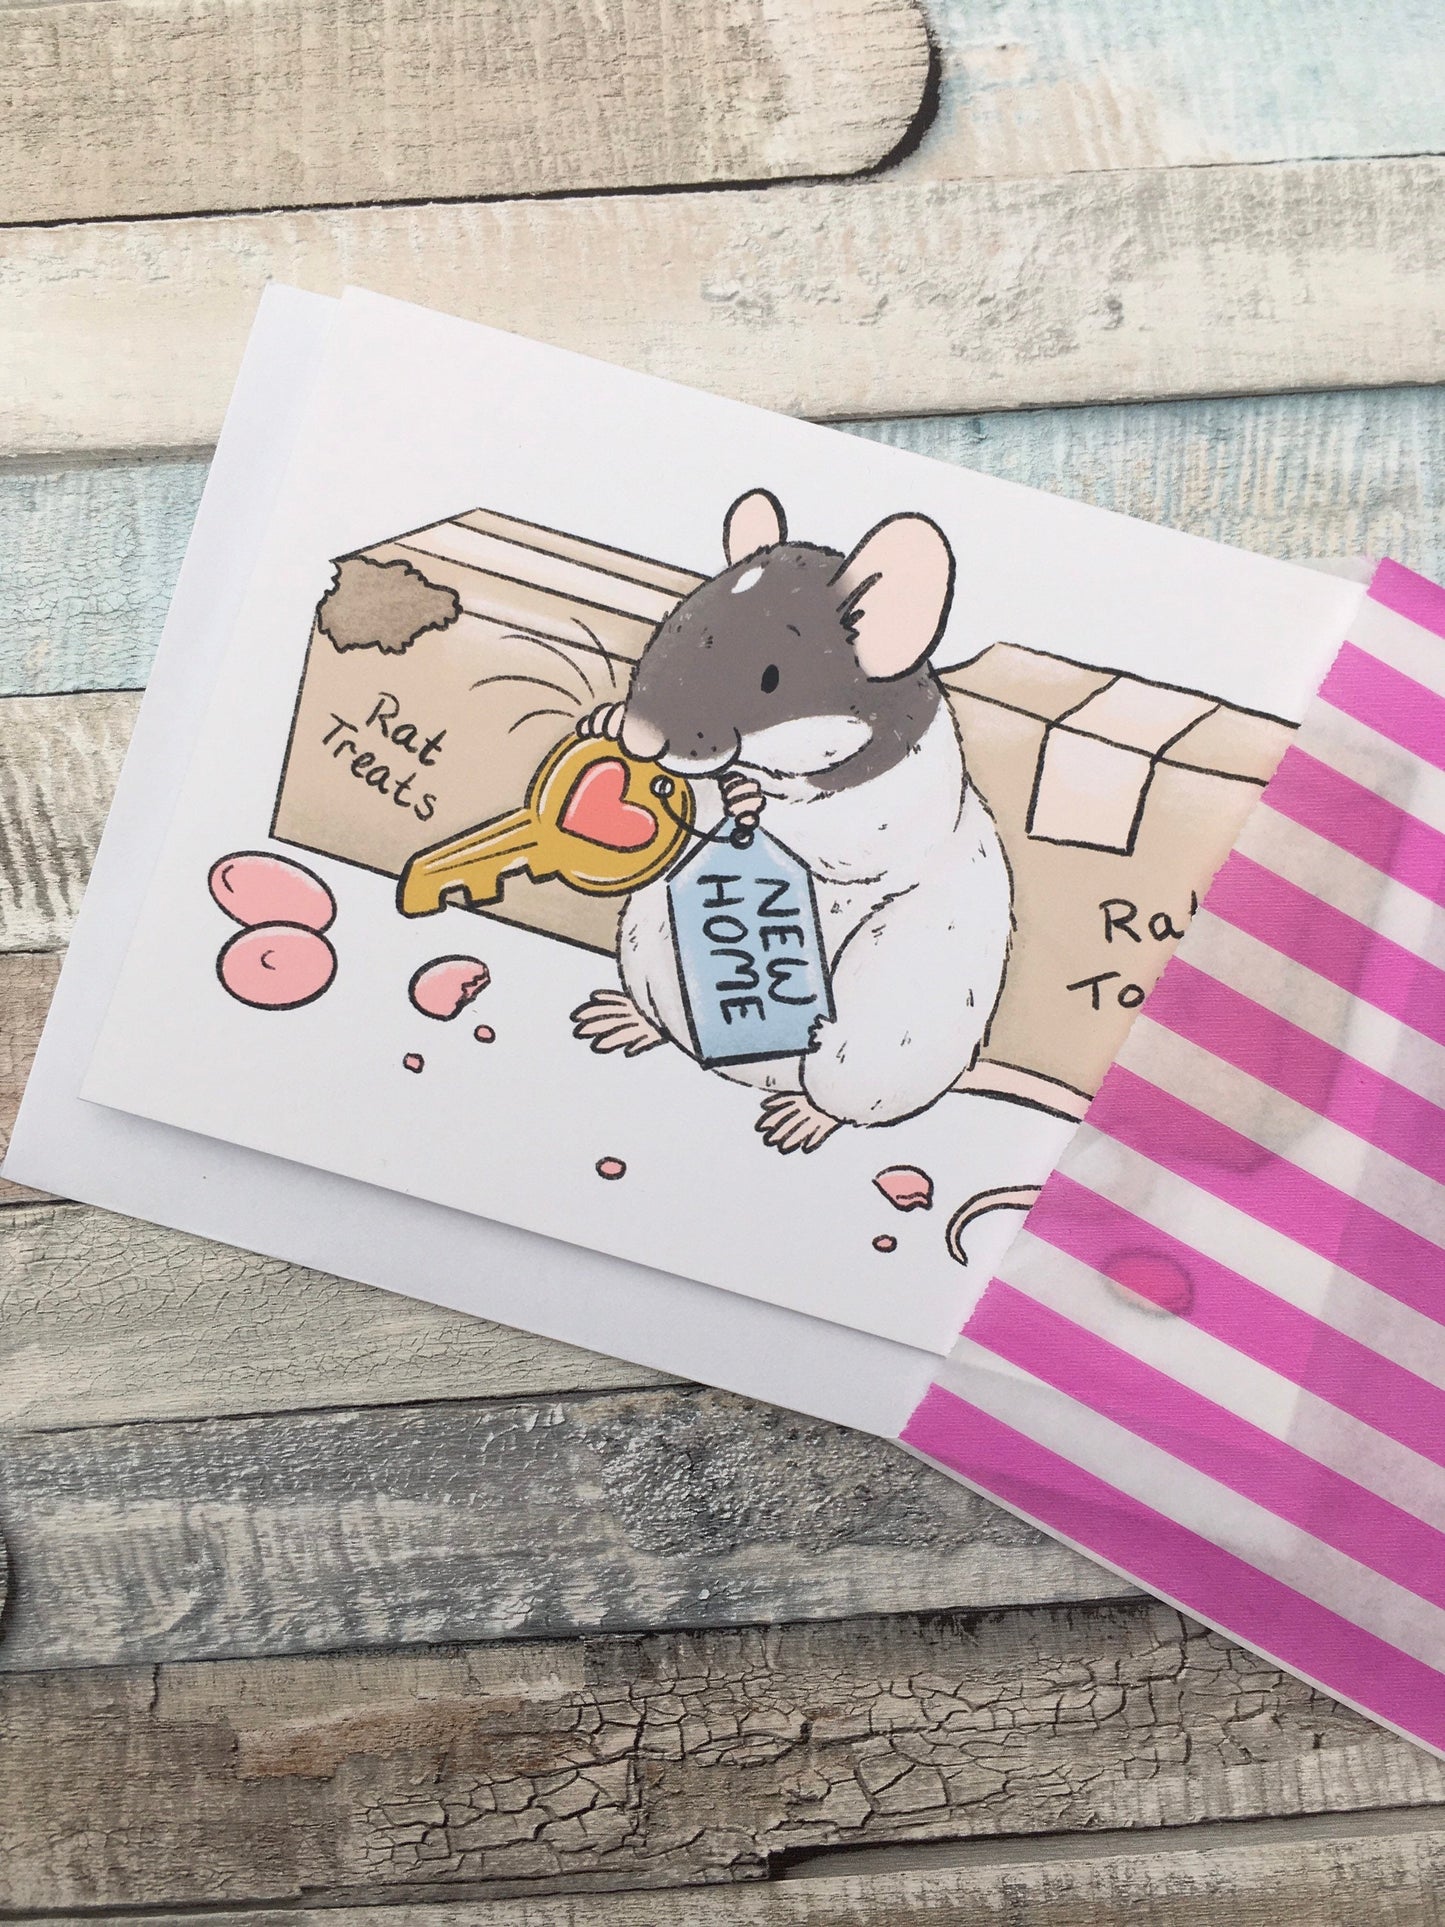 New Home Cute Rat Greeting Card - A6 Size With White Envelope - Fancy Rat Art - Moving, New Home Card